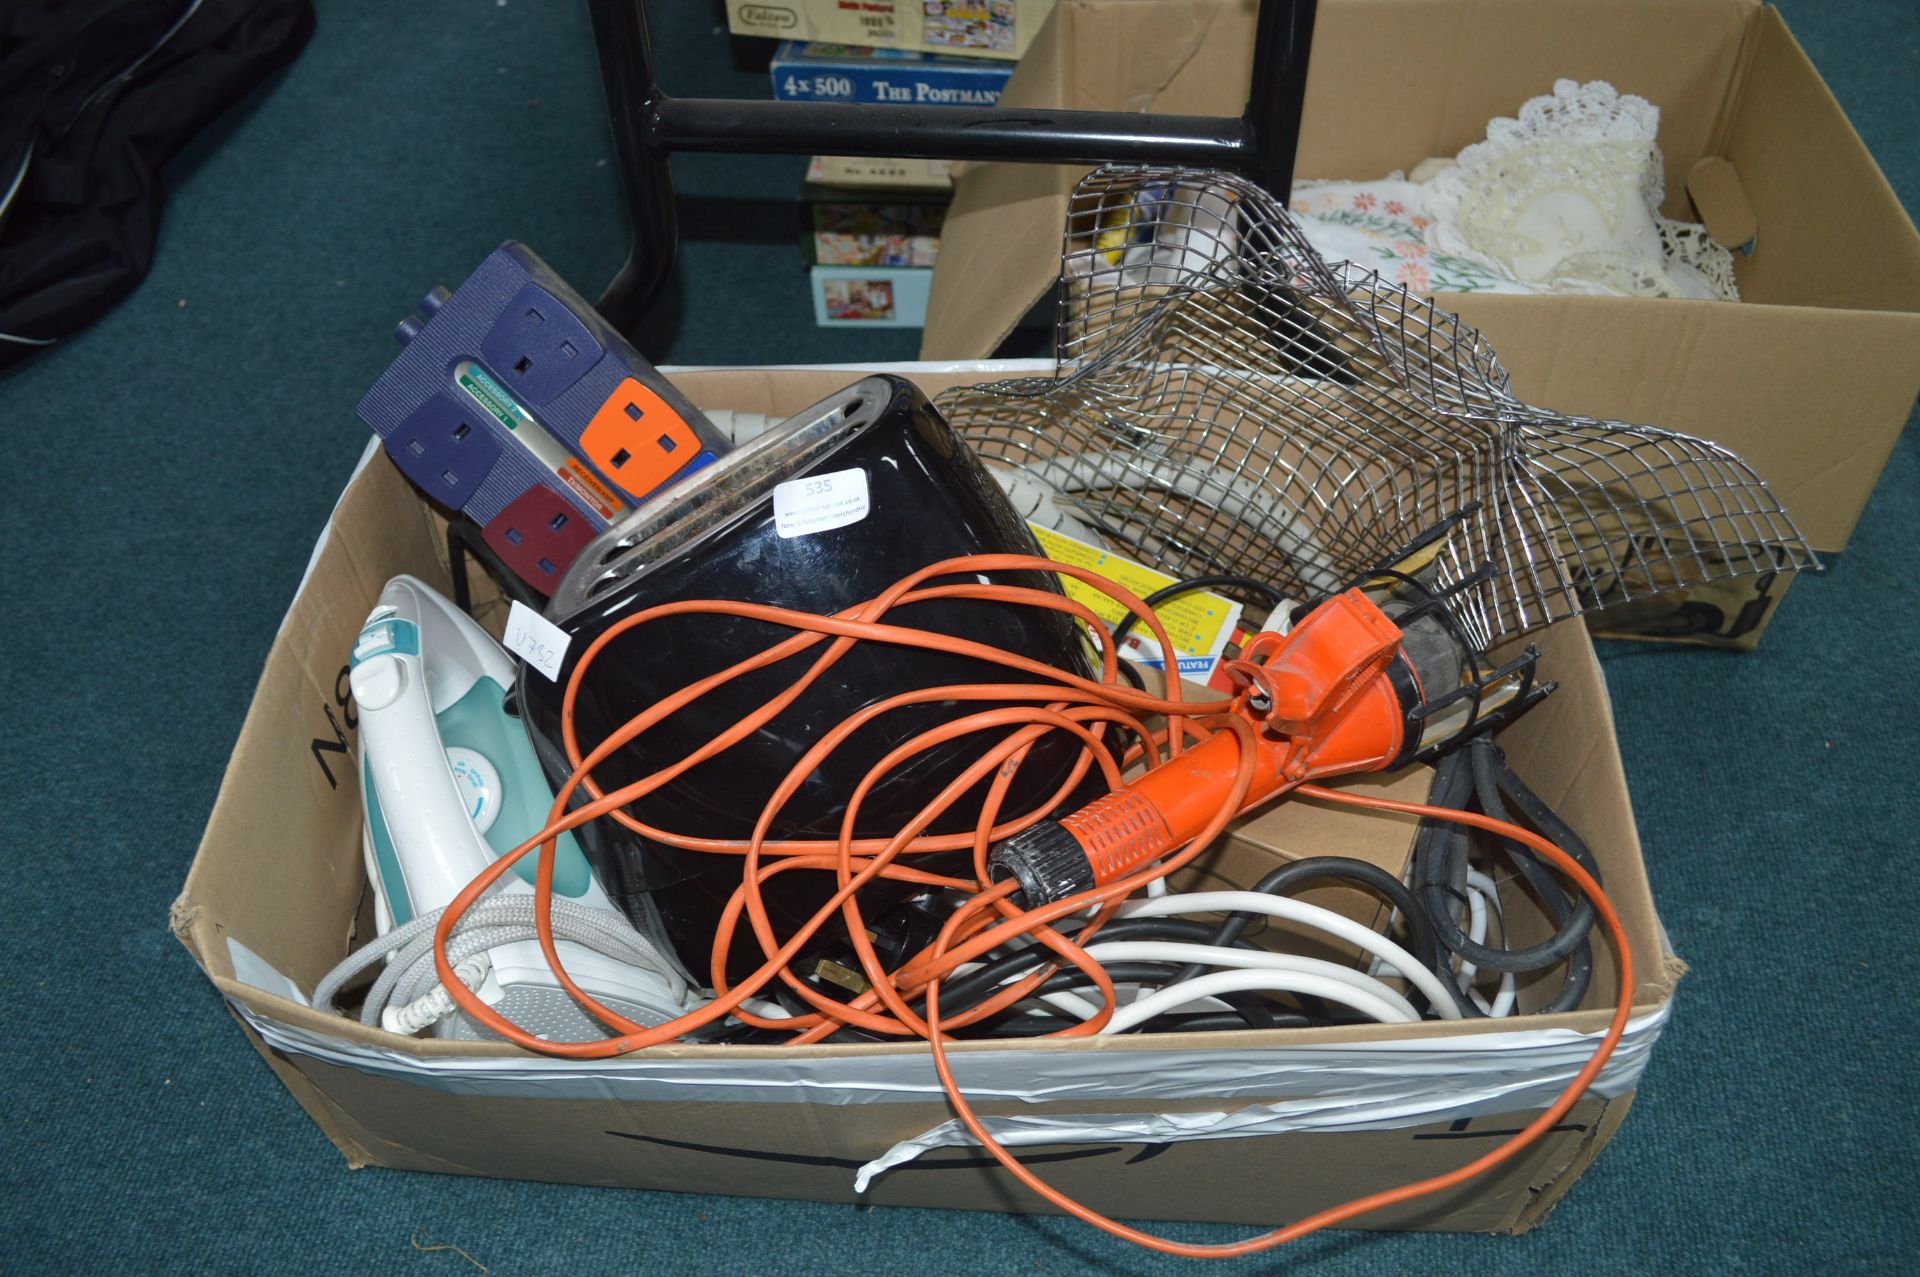 Electrical Items; Toaster, Iron, Splitter, Lamp, e